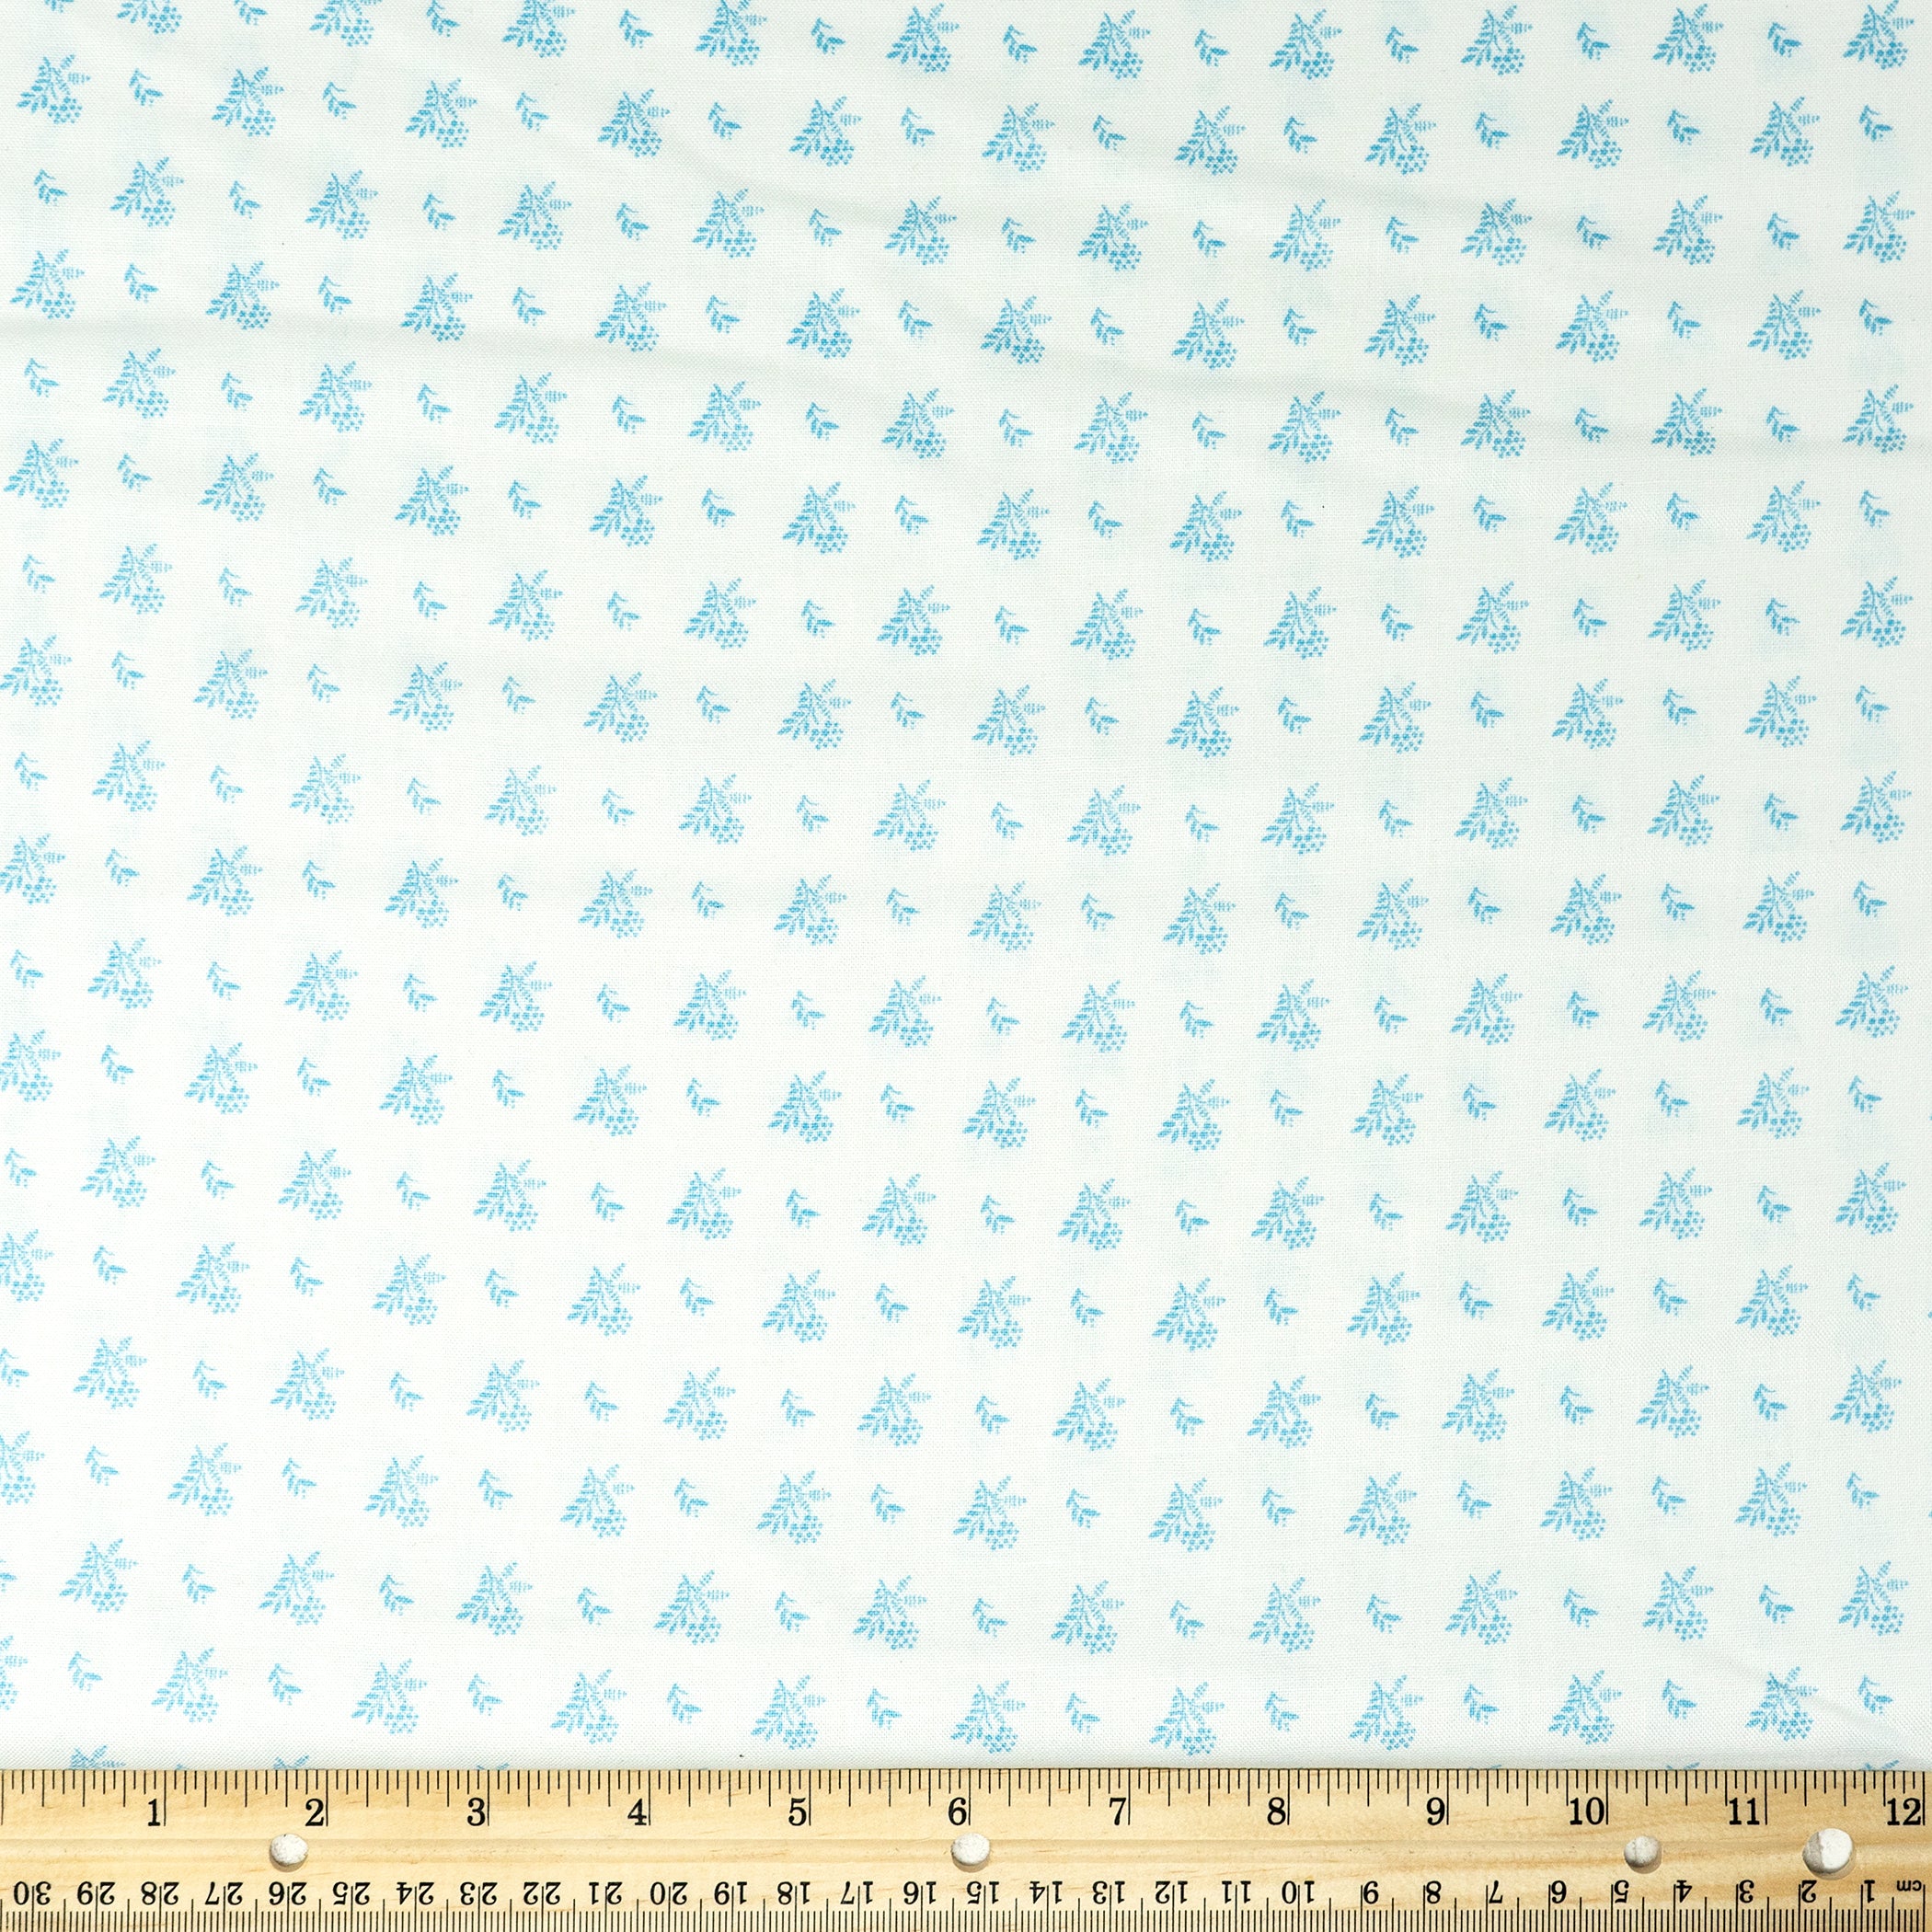 Waverly Inspirations Cotton 44" Mini Bouquet Powder Blue Color Sewing Fabric by the Yard